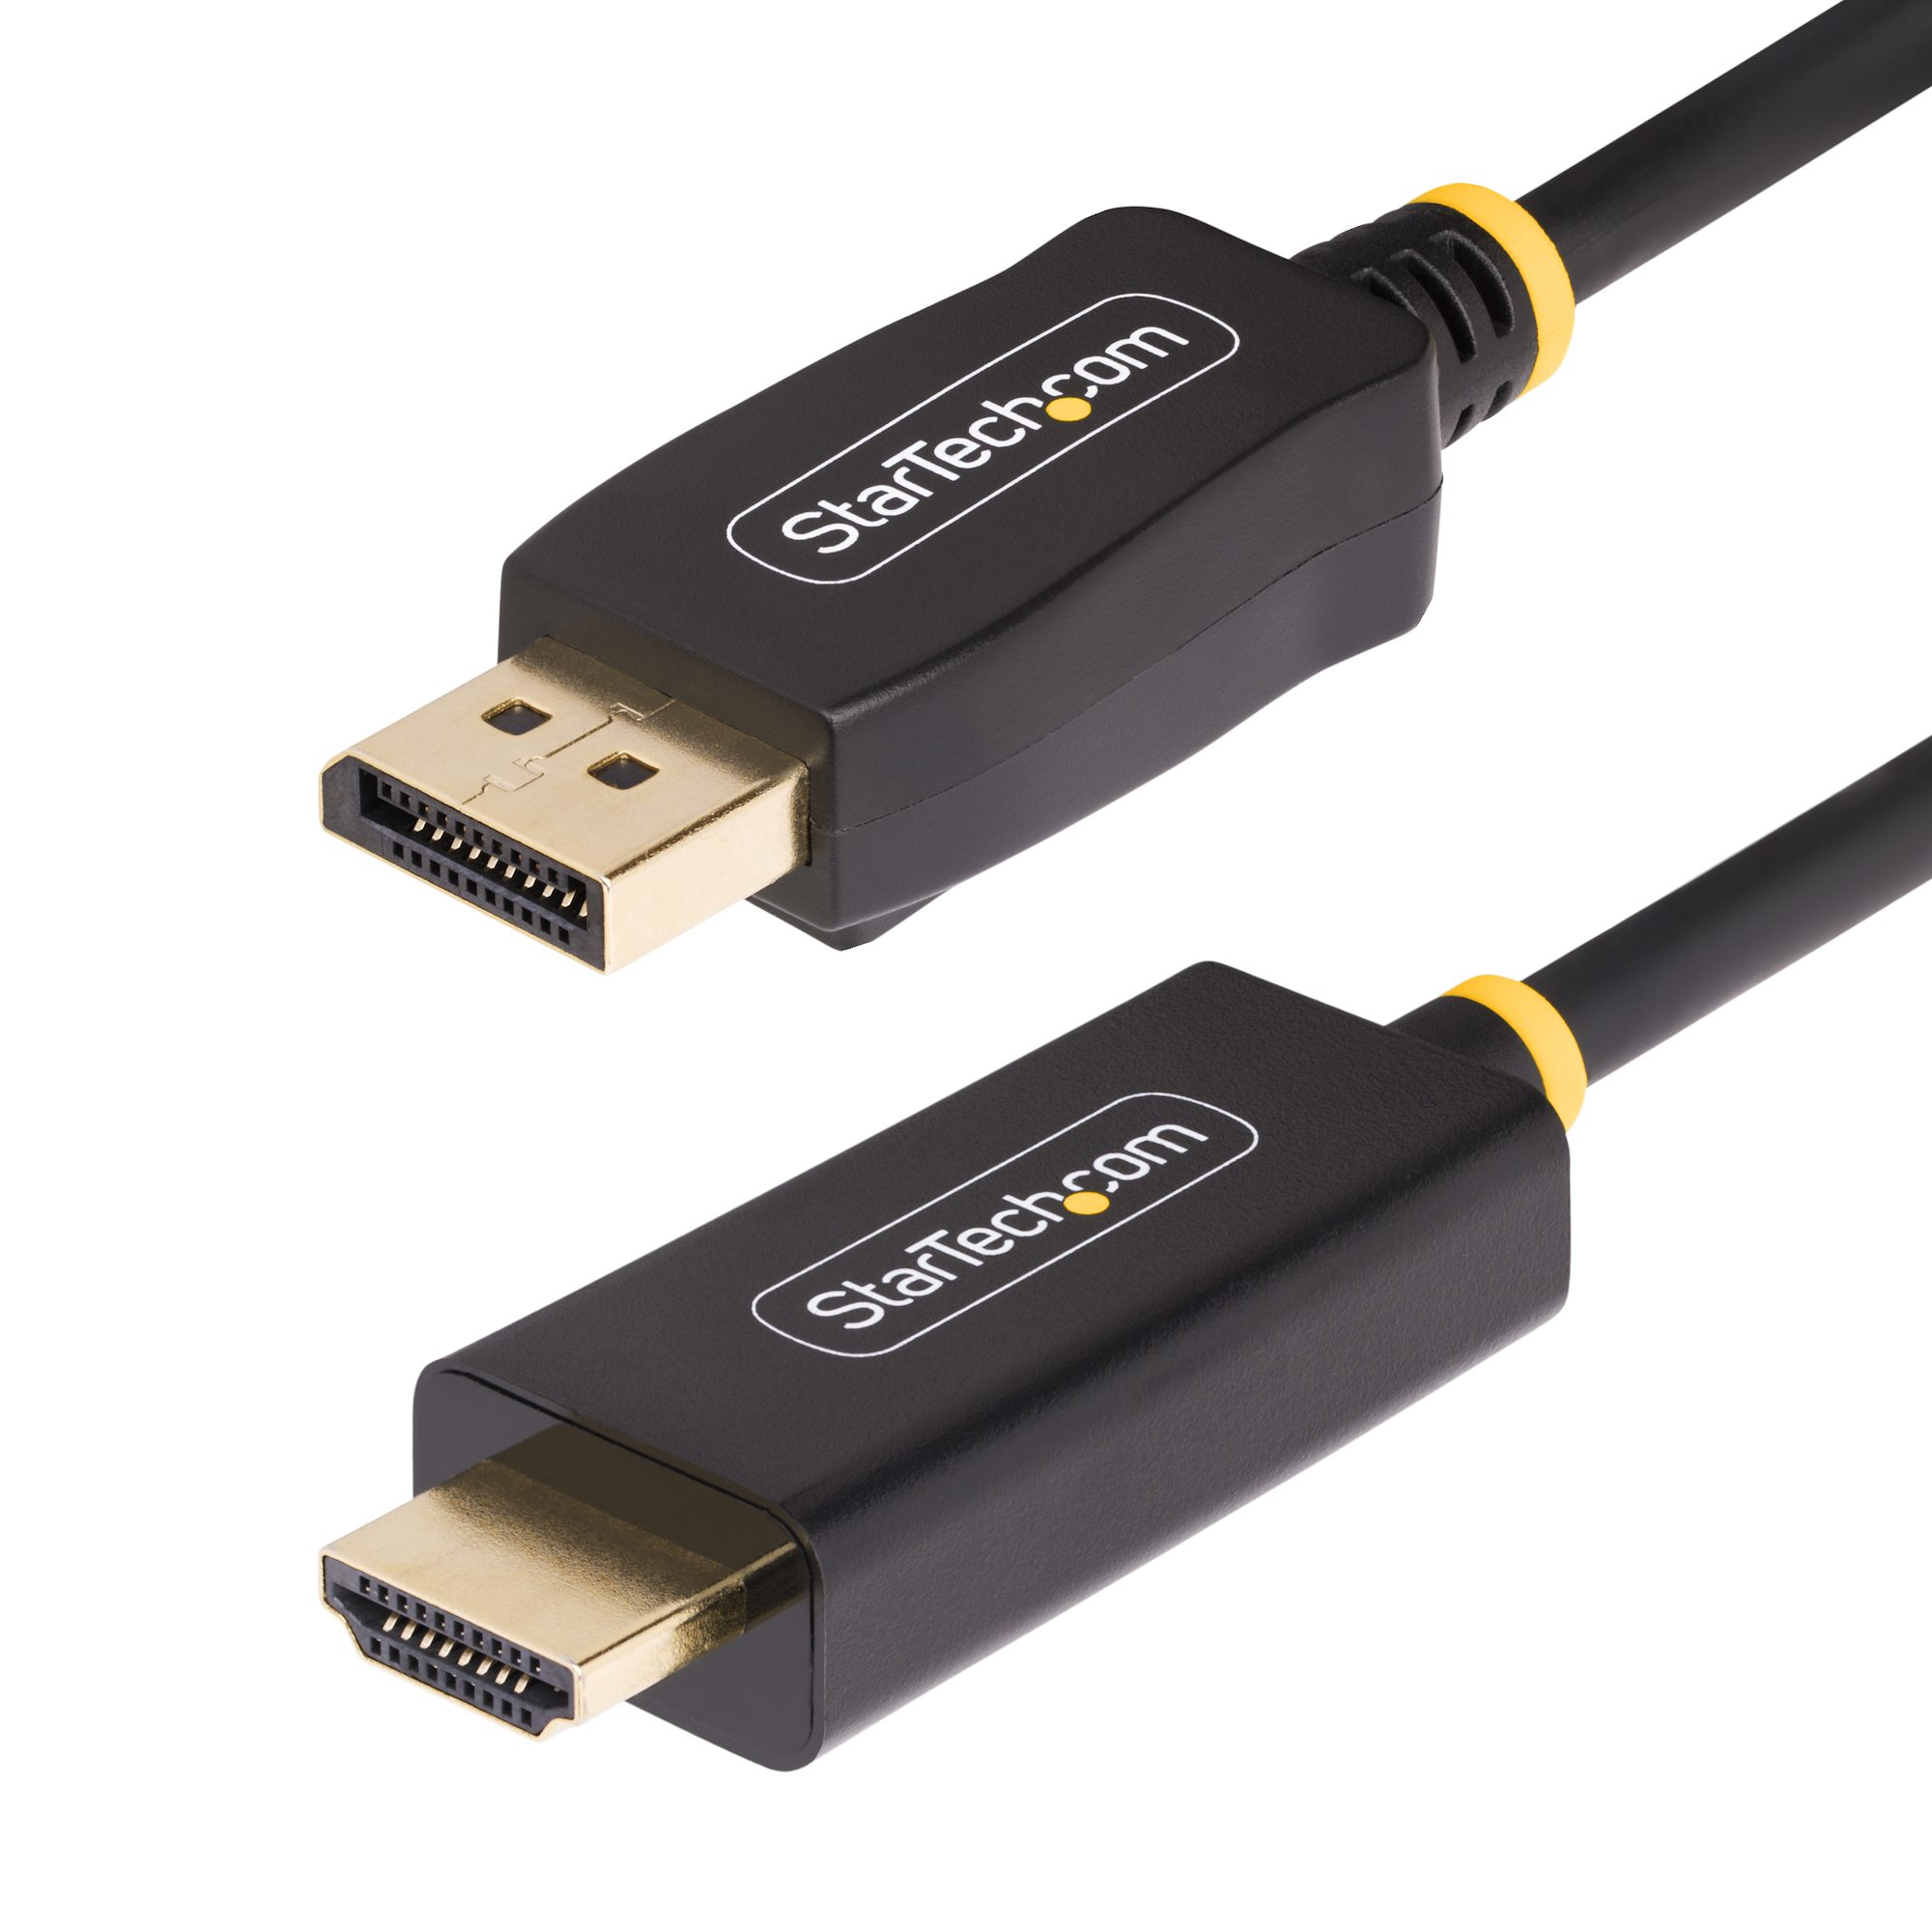 StarTech.com 3.3ft (1m) DisplayPort to HDMI Adapter Cable, 4K 60Hz with HDR, DP to HDMI 2.0b, Active Video Converter, DisplayPort Desktop to HDMI Monitor, M/M - DisplayPort to HDMI Cord (3F-DP-HDMI-4K60-HDR)